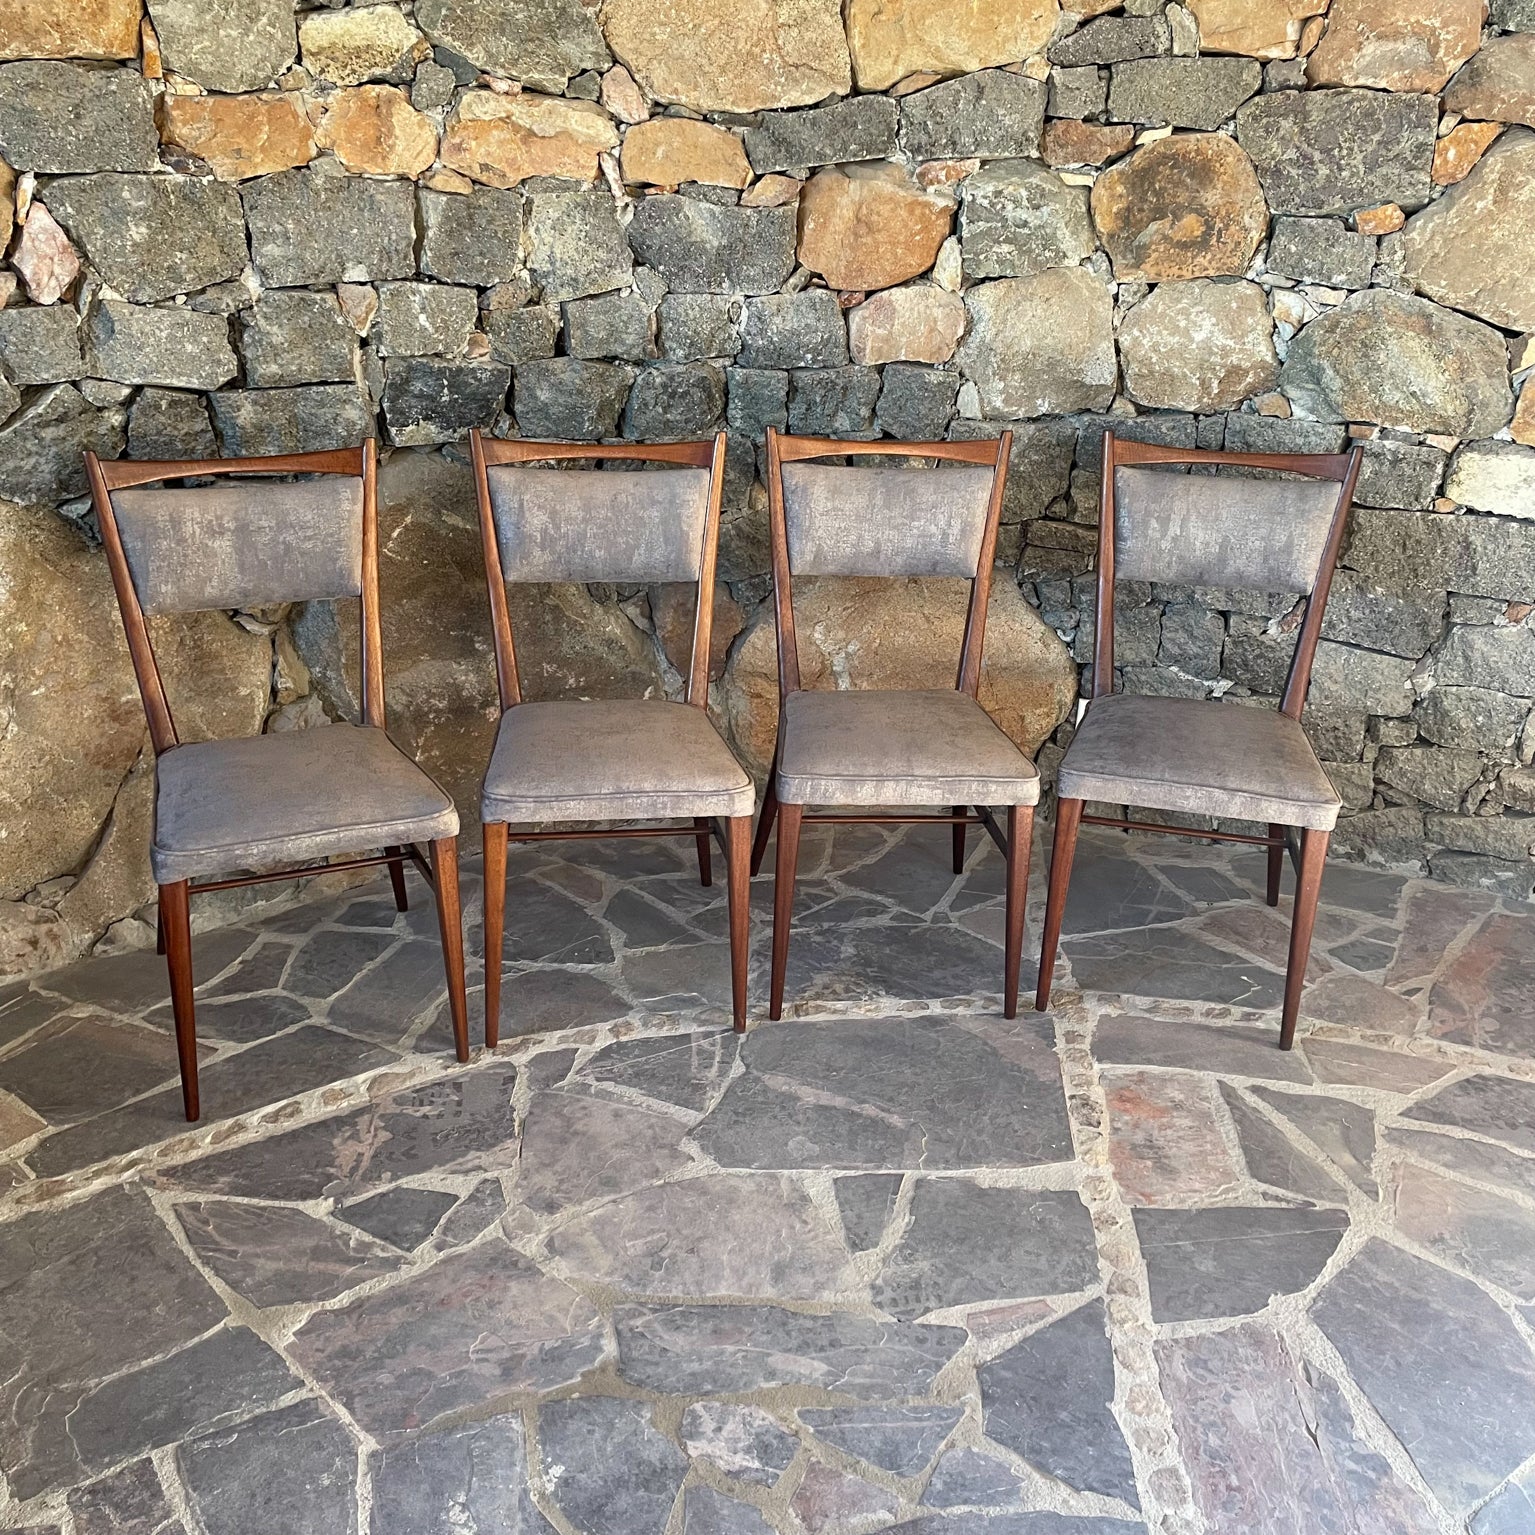 Chairs.
Set of 4 restored vintage sophistication dining chairs by Paul McCobb 1950s USA.
Paul McCobb for H Sacks & Sons Connoisseur Collection. 
Designed in mahogany and brass. 
New gray velvet textured upholstery 
Measures: 33 H x 16 W x 20.5